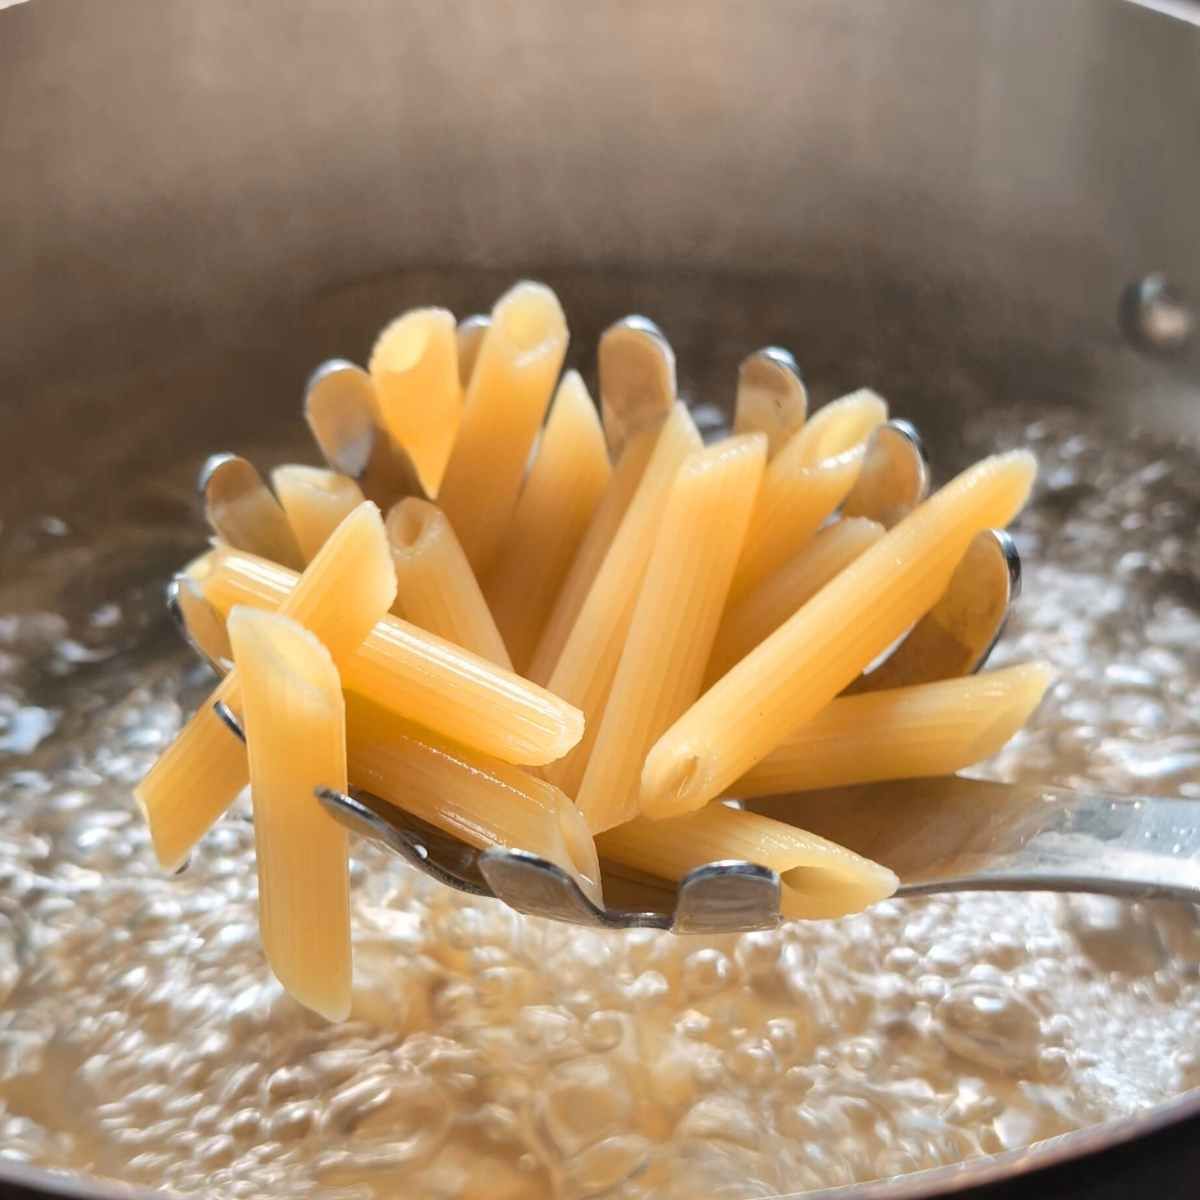 penne pasta being cooked in a pot of water ready for mozzarella sauce.